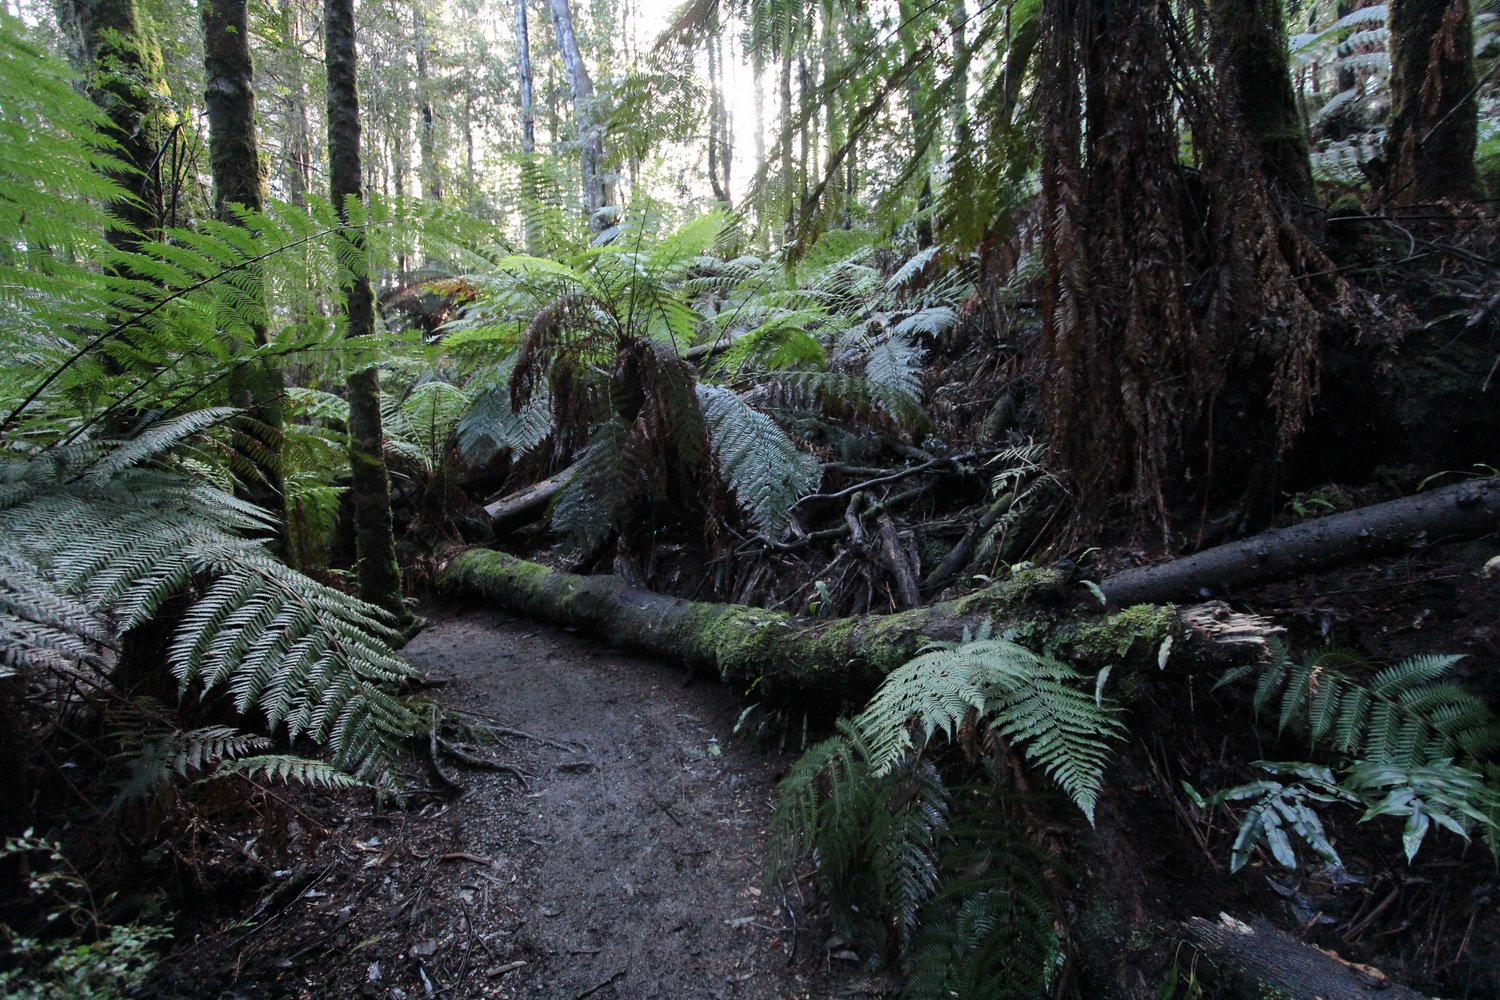 Track bordered by a moss covered log. Ada Tree walk, Noojee. July 2020.